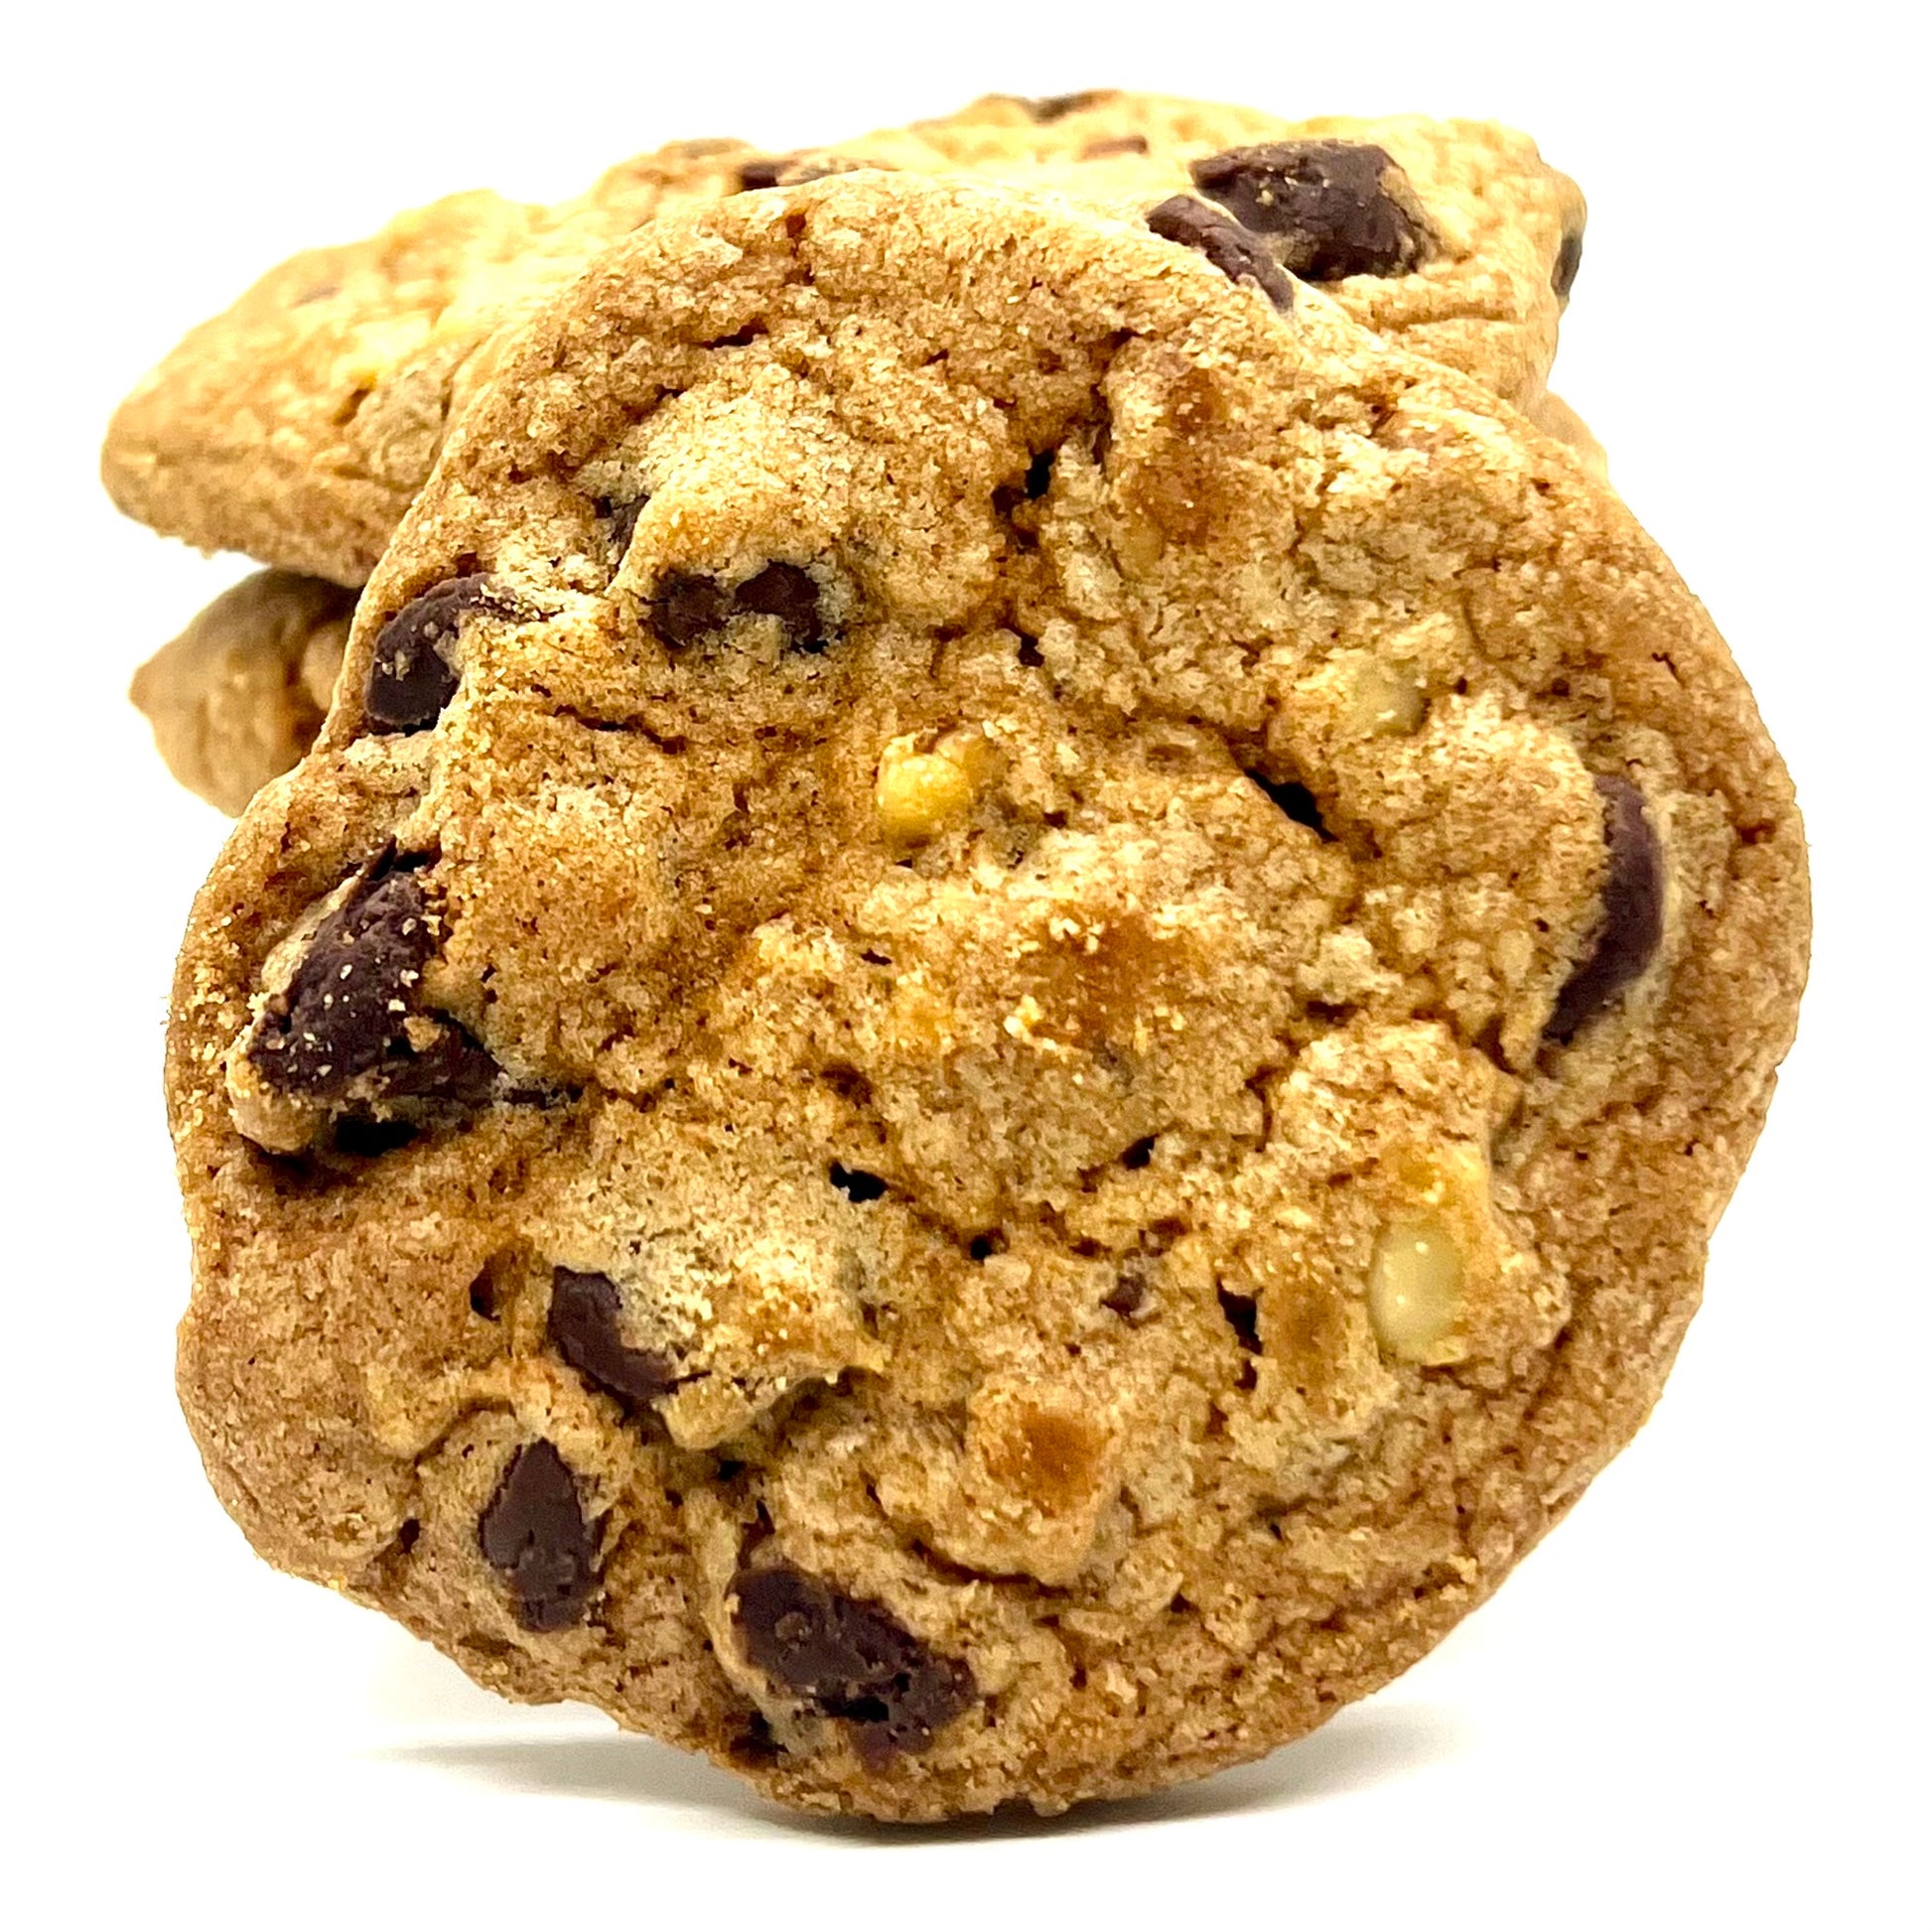 Chocolate Chip (W/ Walnuts) - Wholesale Unlimited Inc.